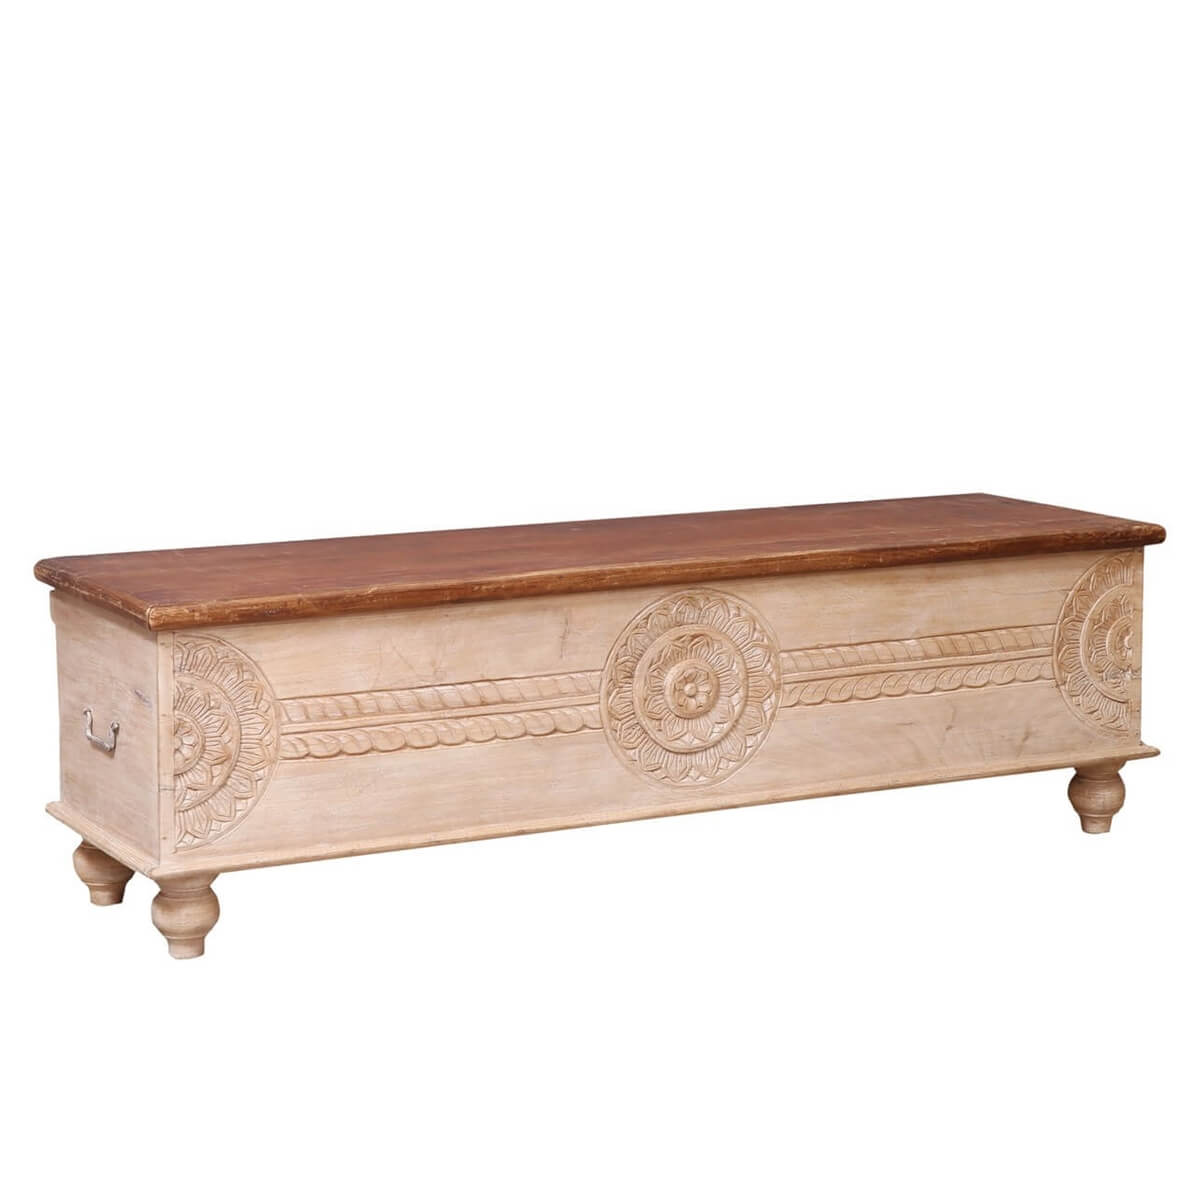 Osmond Rustic Reclaimed Wood Floral Hand Carved  Storage Trunk Chest